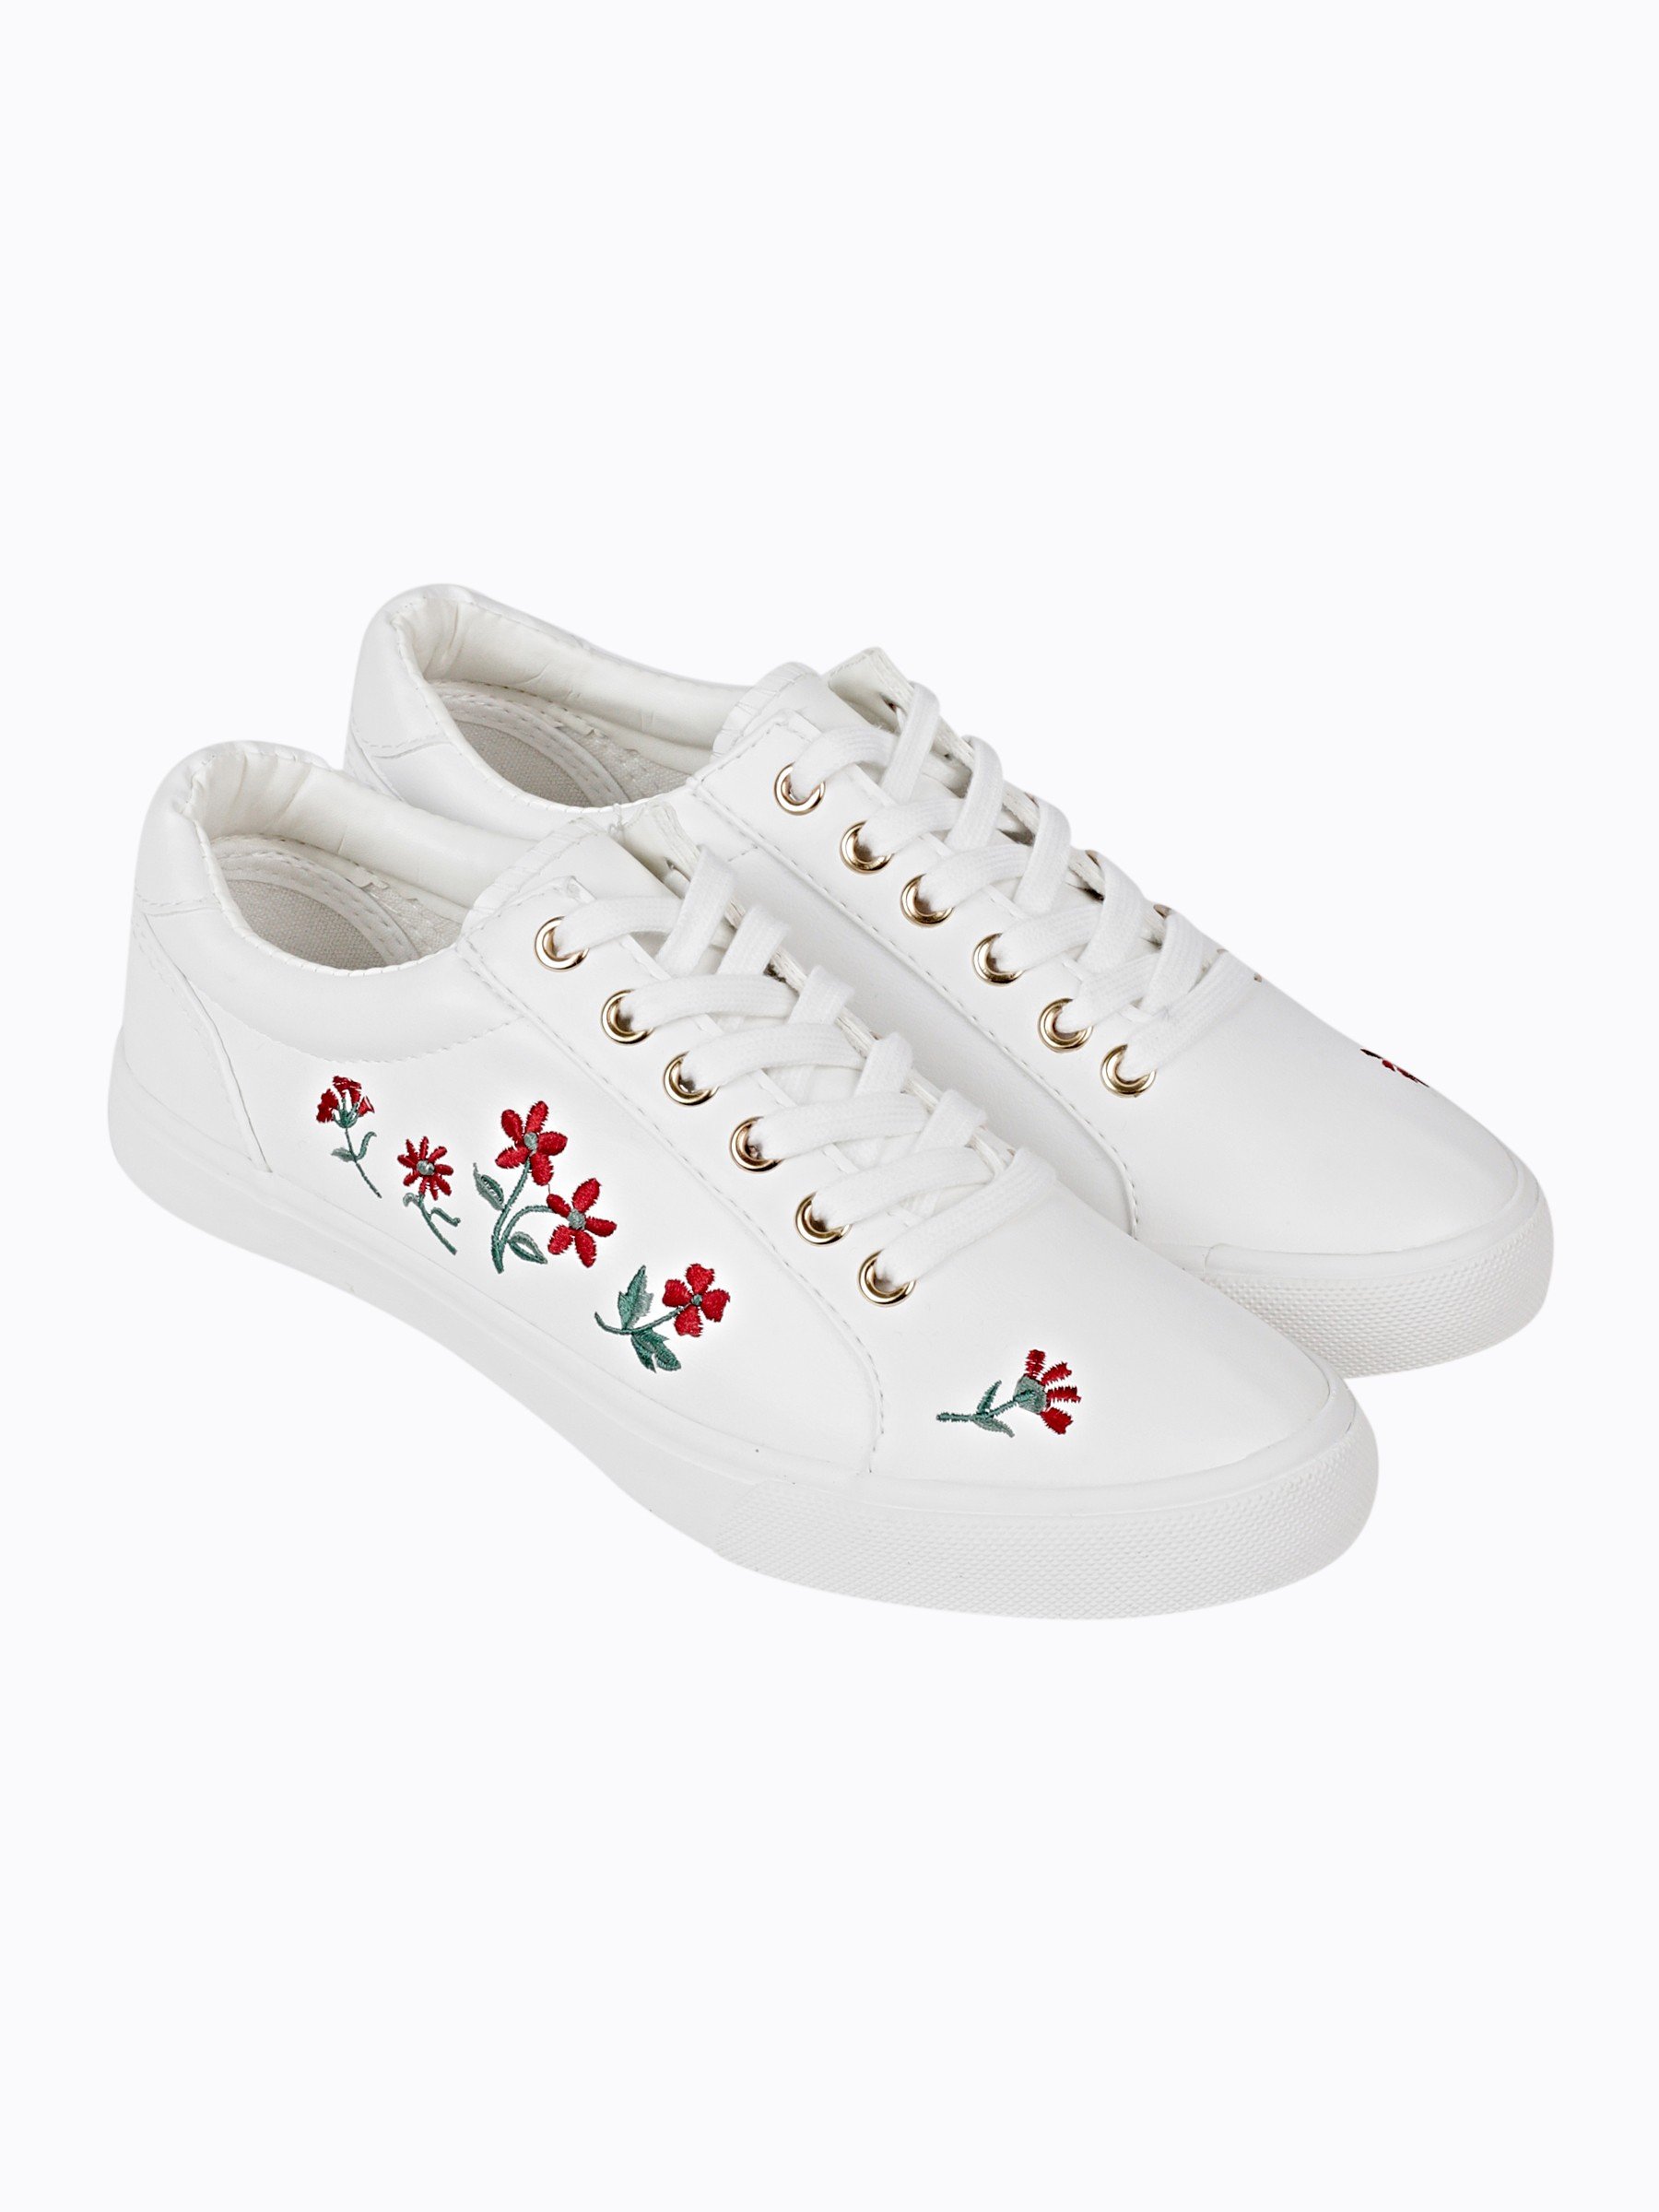 white sneakers with floral embroidery